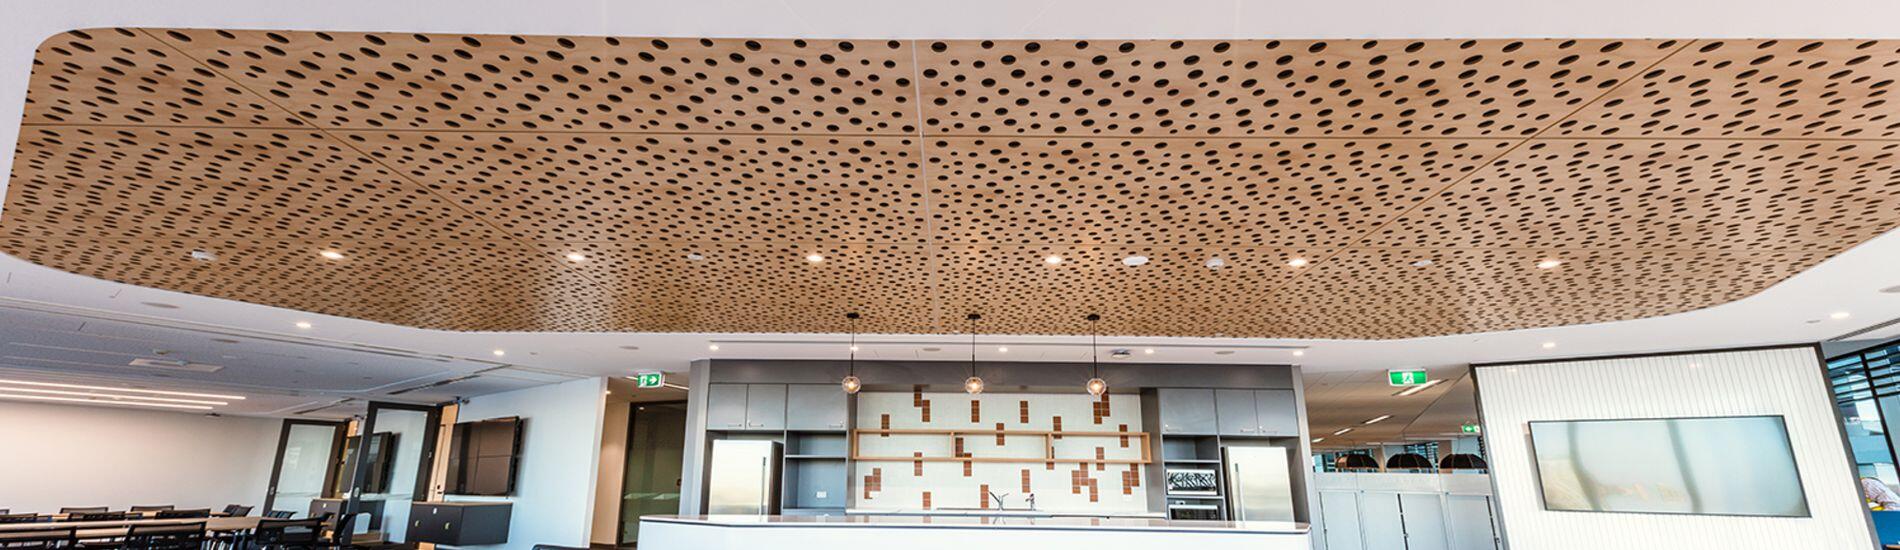 SUPACOUSTIC Creative Acoustic Ceiling Features in Workplace Breakout